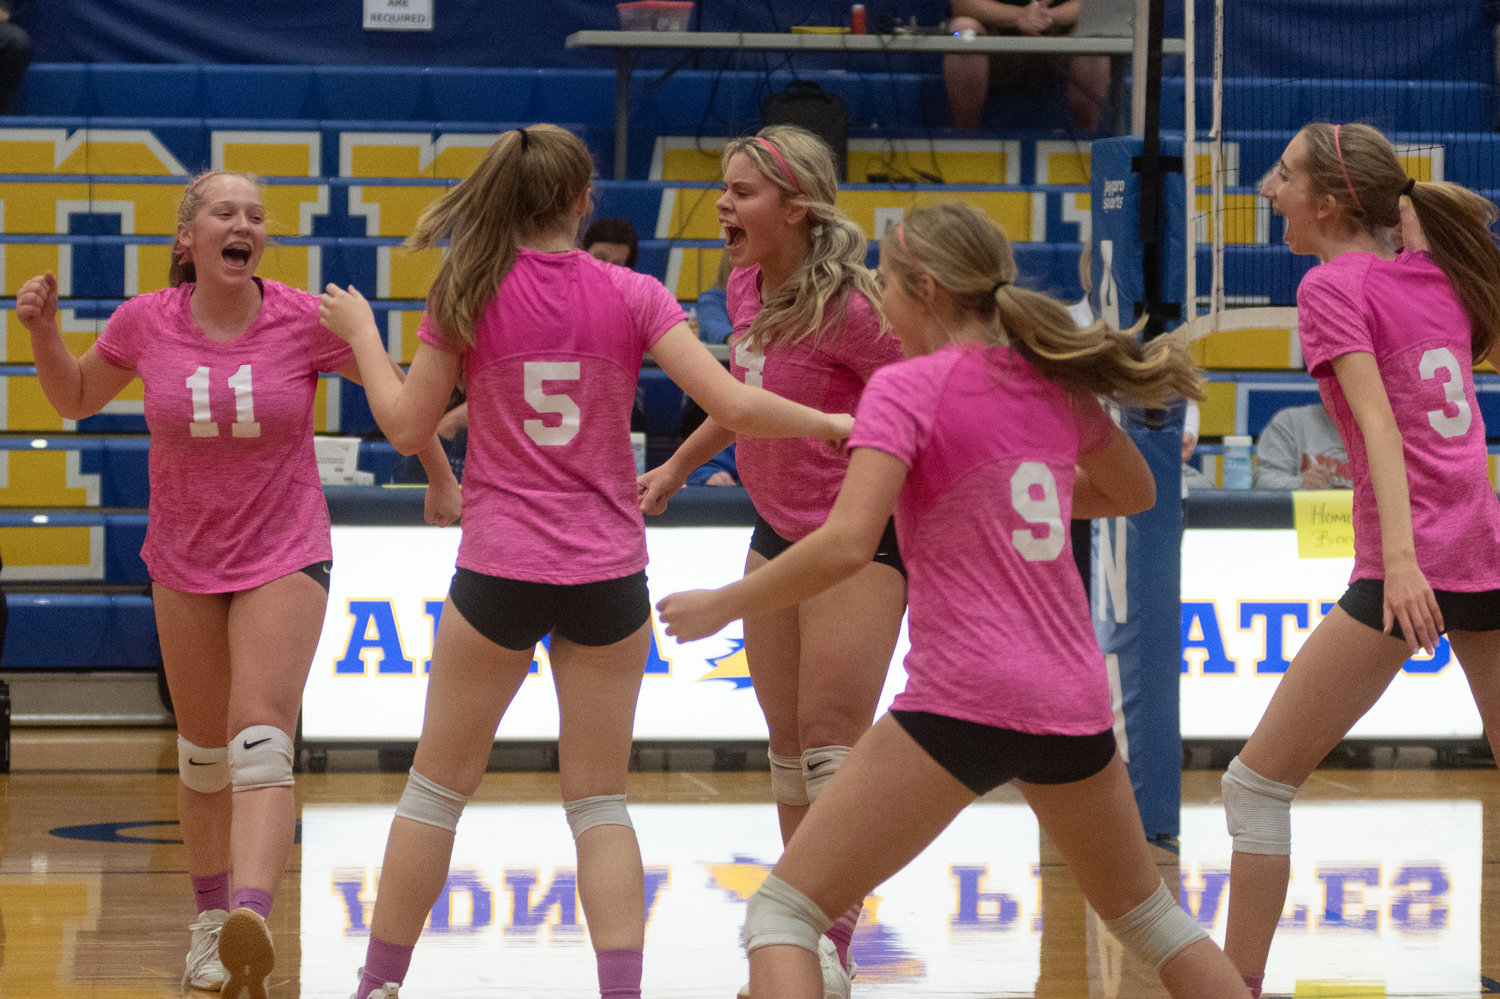 The Adna volleyball team celebrates a point against Raymond in the District 4 semifinals Nov. 3.